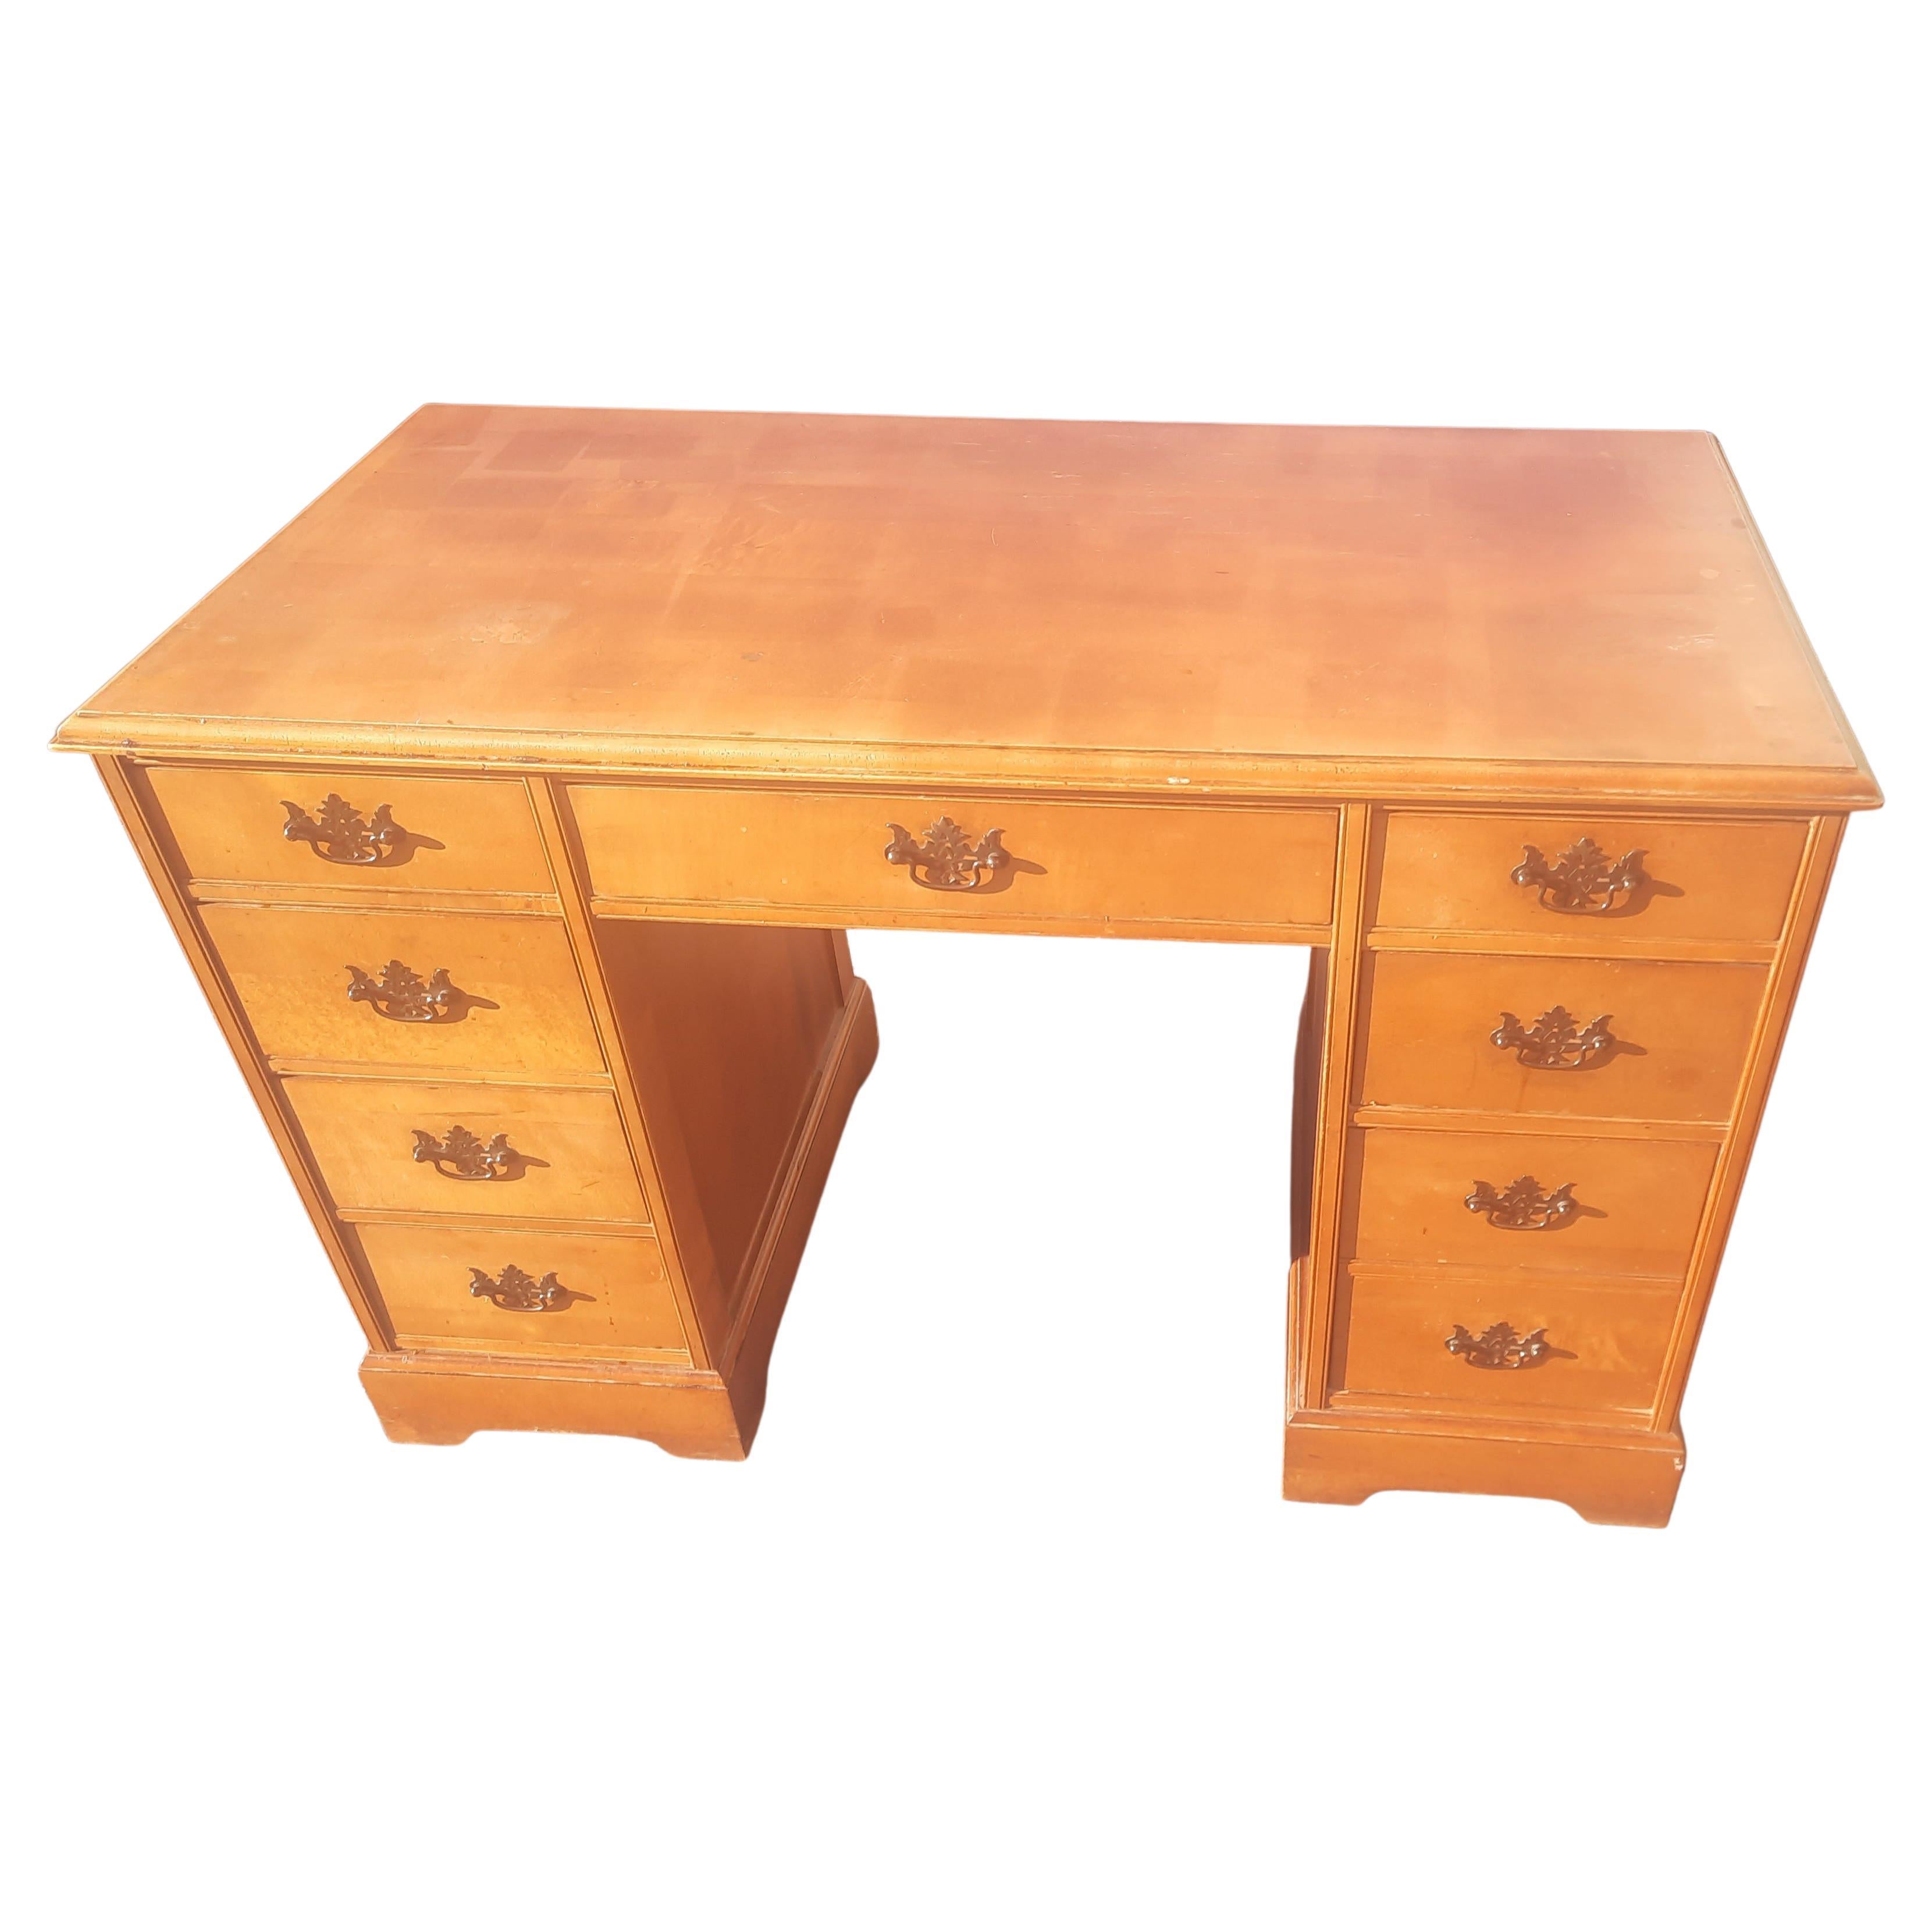 Ethan Allen Classic Manor solid Maple 8-Drawer Partners Desk Writing Desk, Circa 1950s
Good vintage condition. All dovetails drawers working perfectly. 
Measures 44W x 22D x 29.5H

W5.